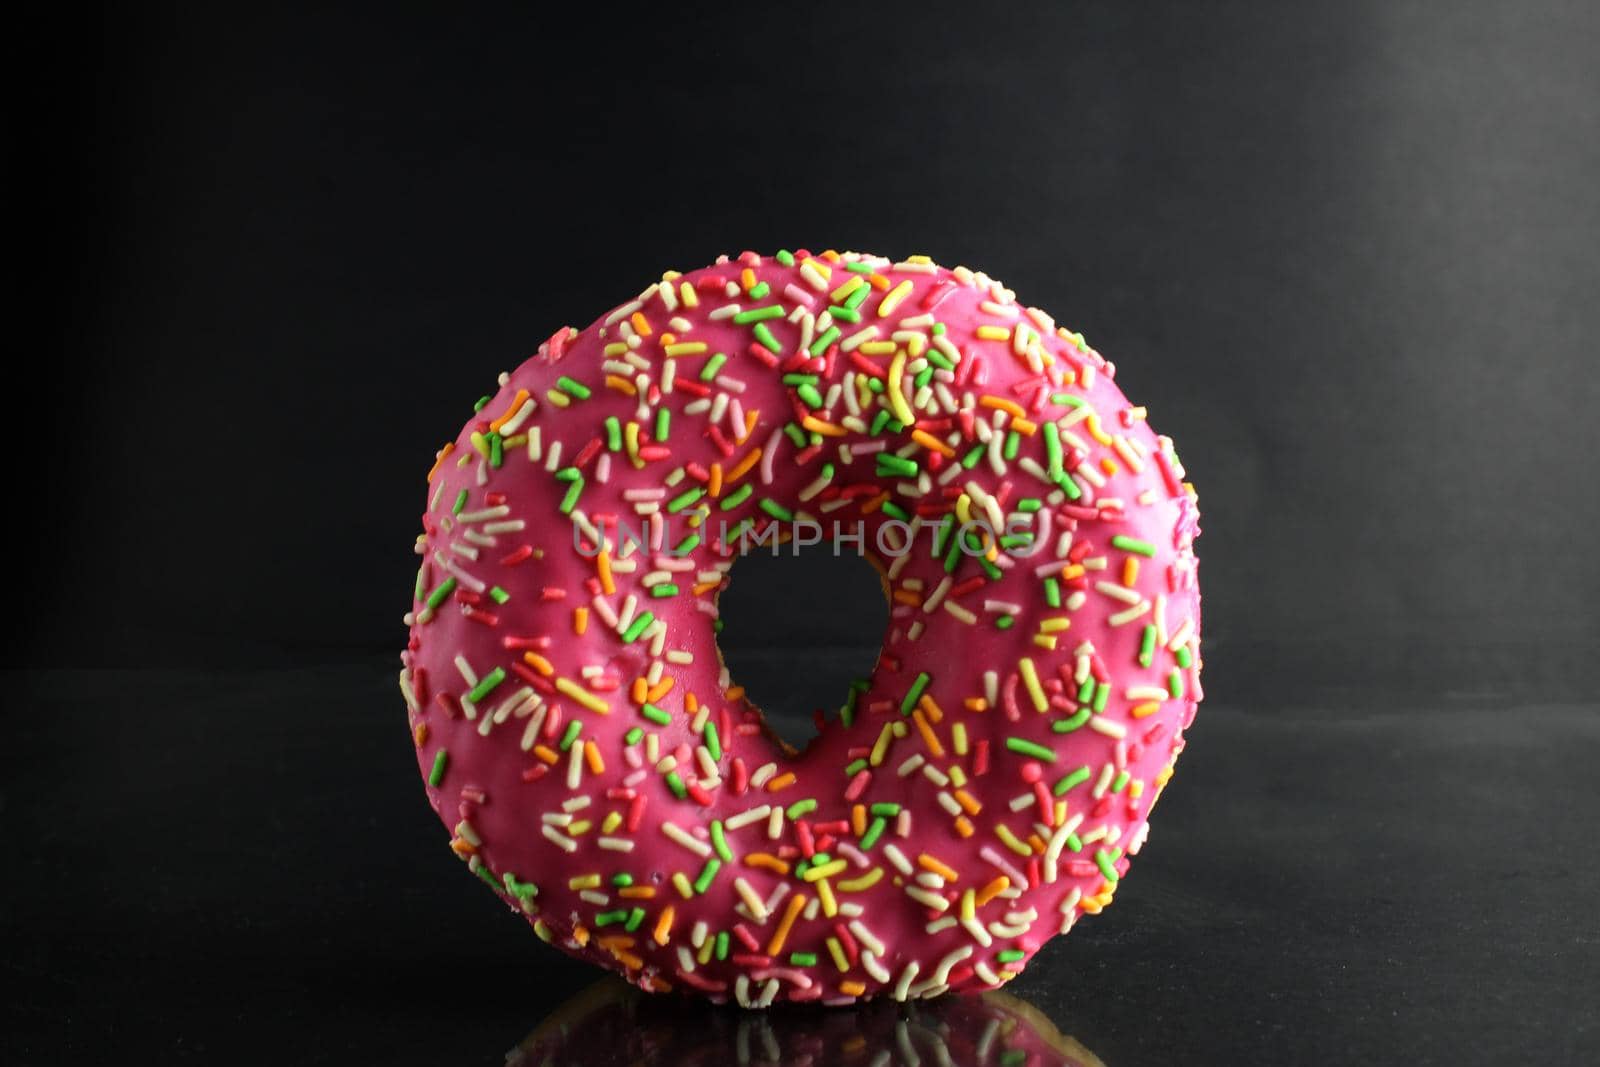 Berliner Donat in pink glaze with colored topping on a black background with a place for text and a copyspace of the delicious food cooking.